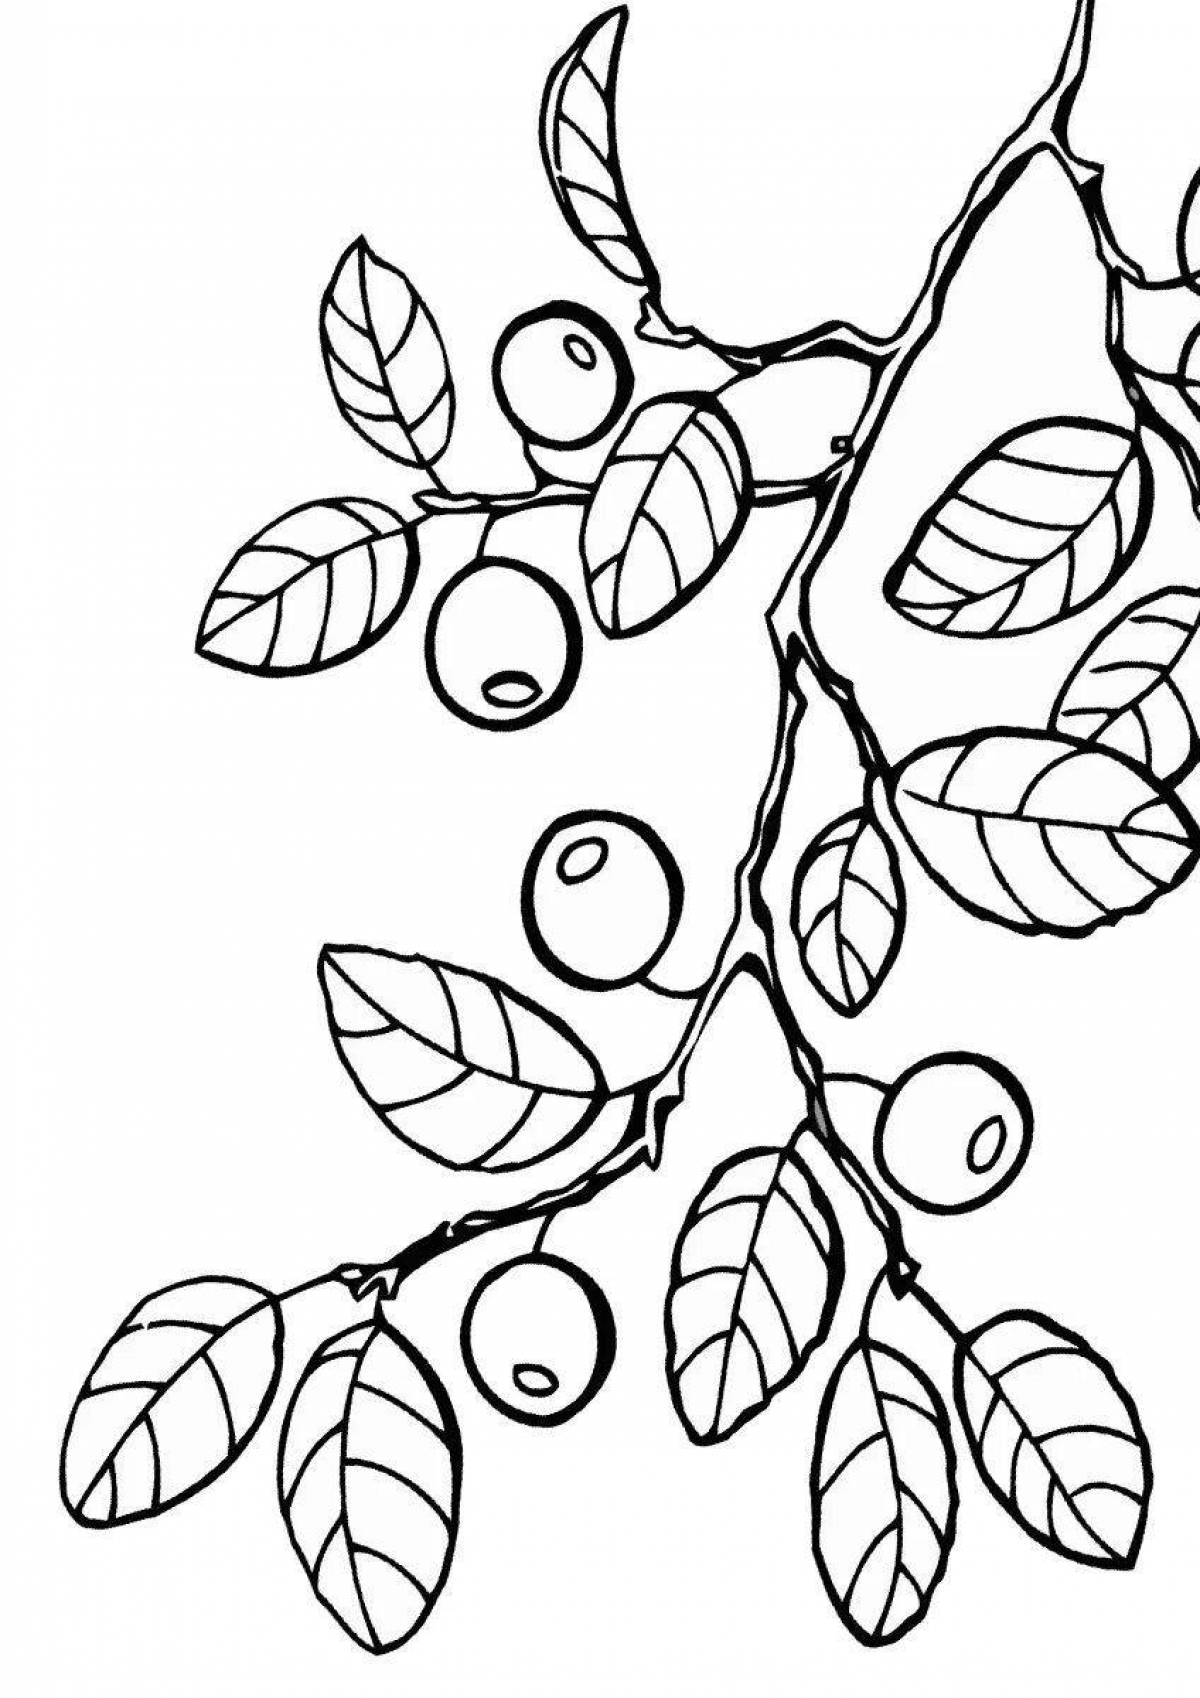 Colorful blueberry coloring book for kids